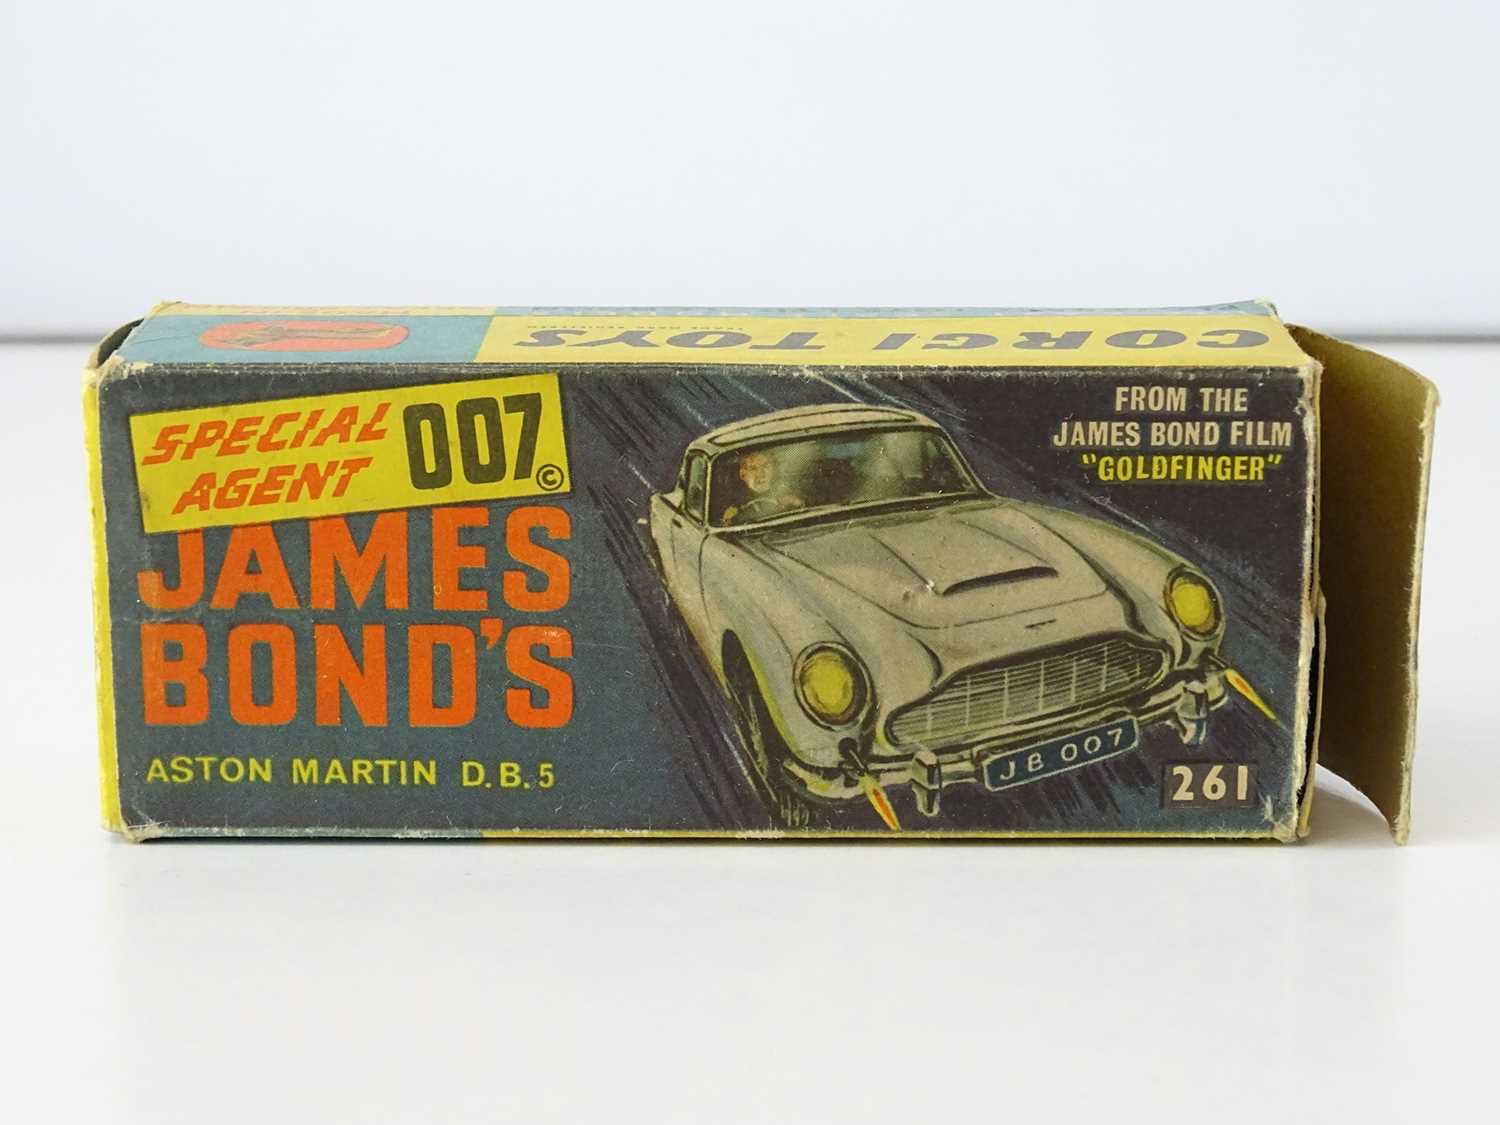 A CORGI Toys 261 James Bond's Aston Martin in gold with working bullet shield, guns and ejector seat